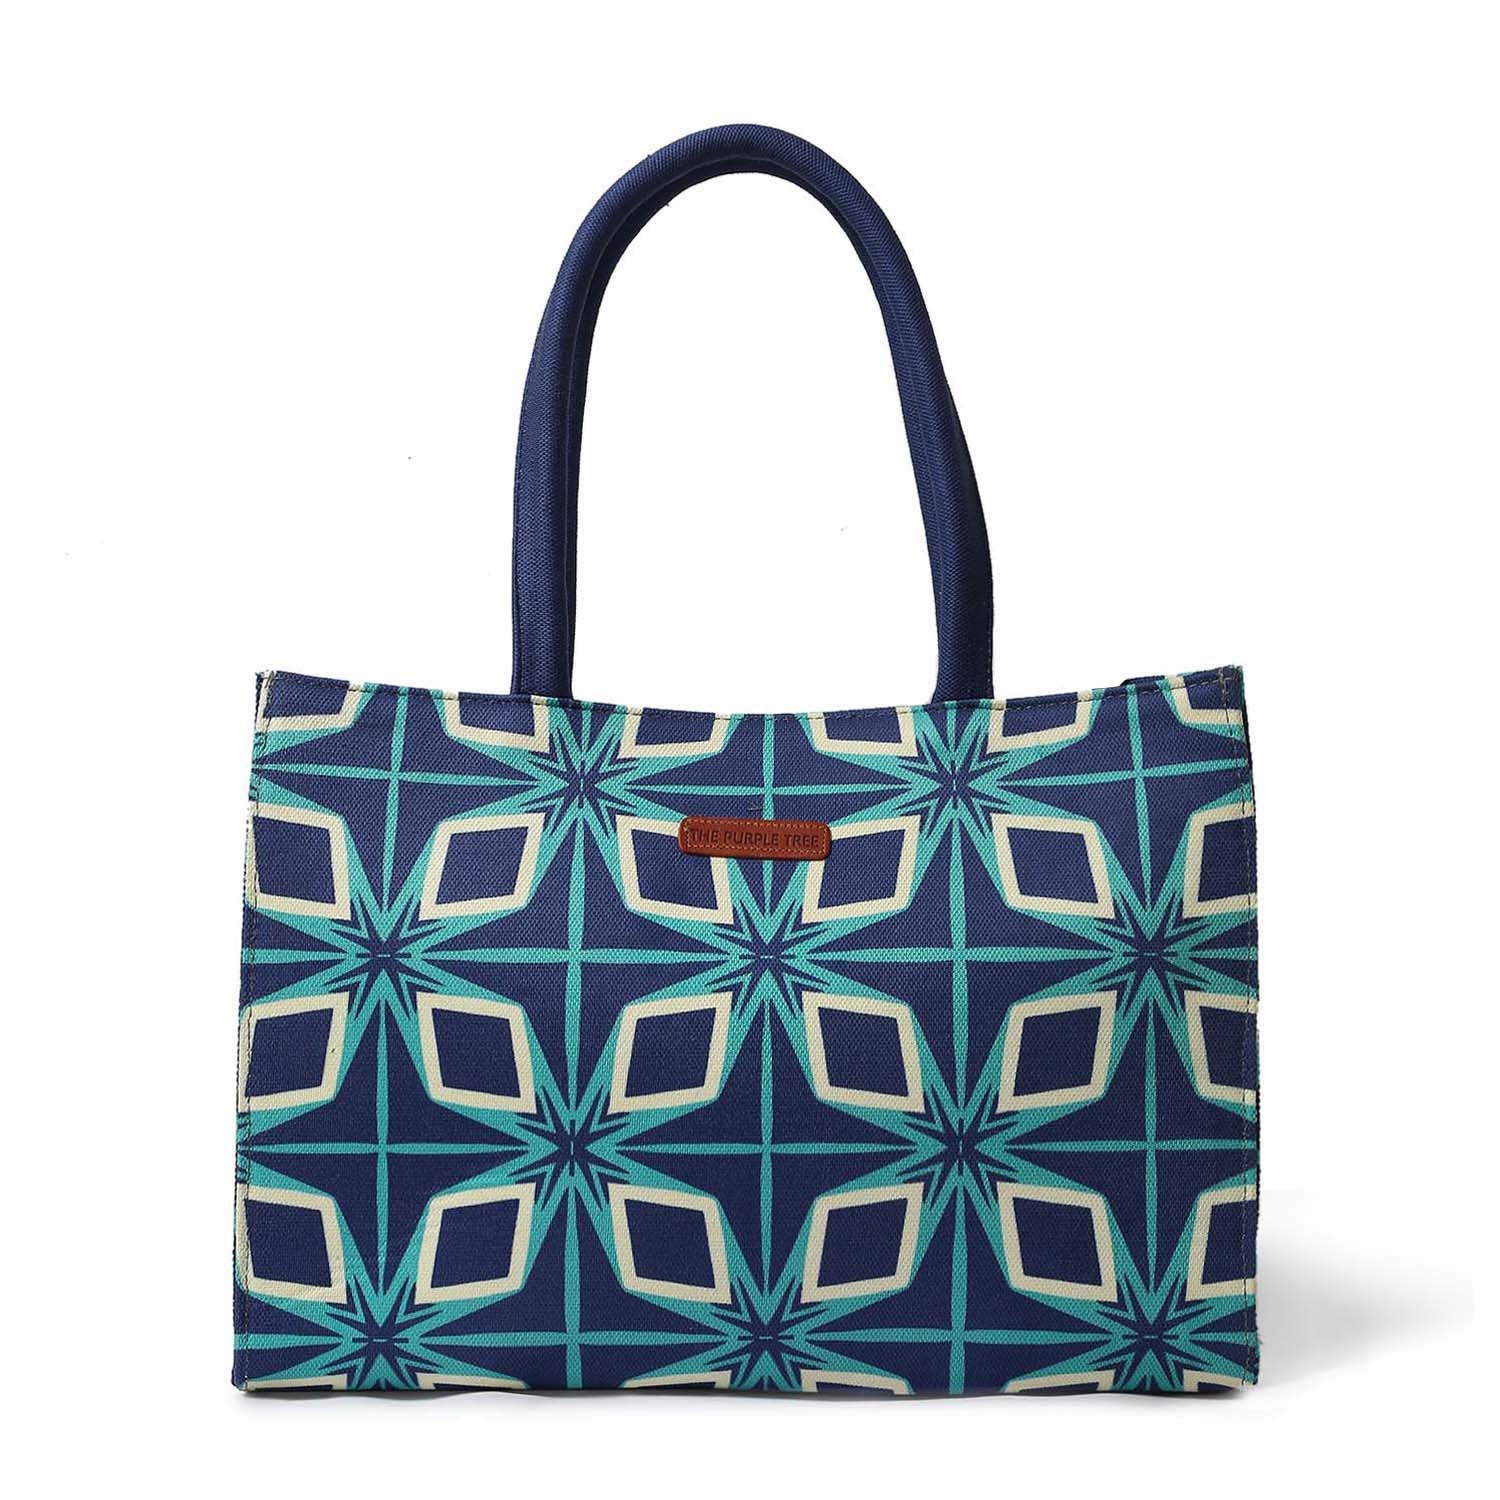 Stylish blue and green tote bag with book and sunglasses.